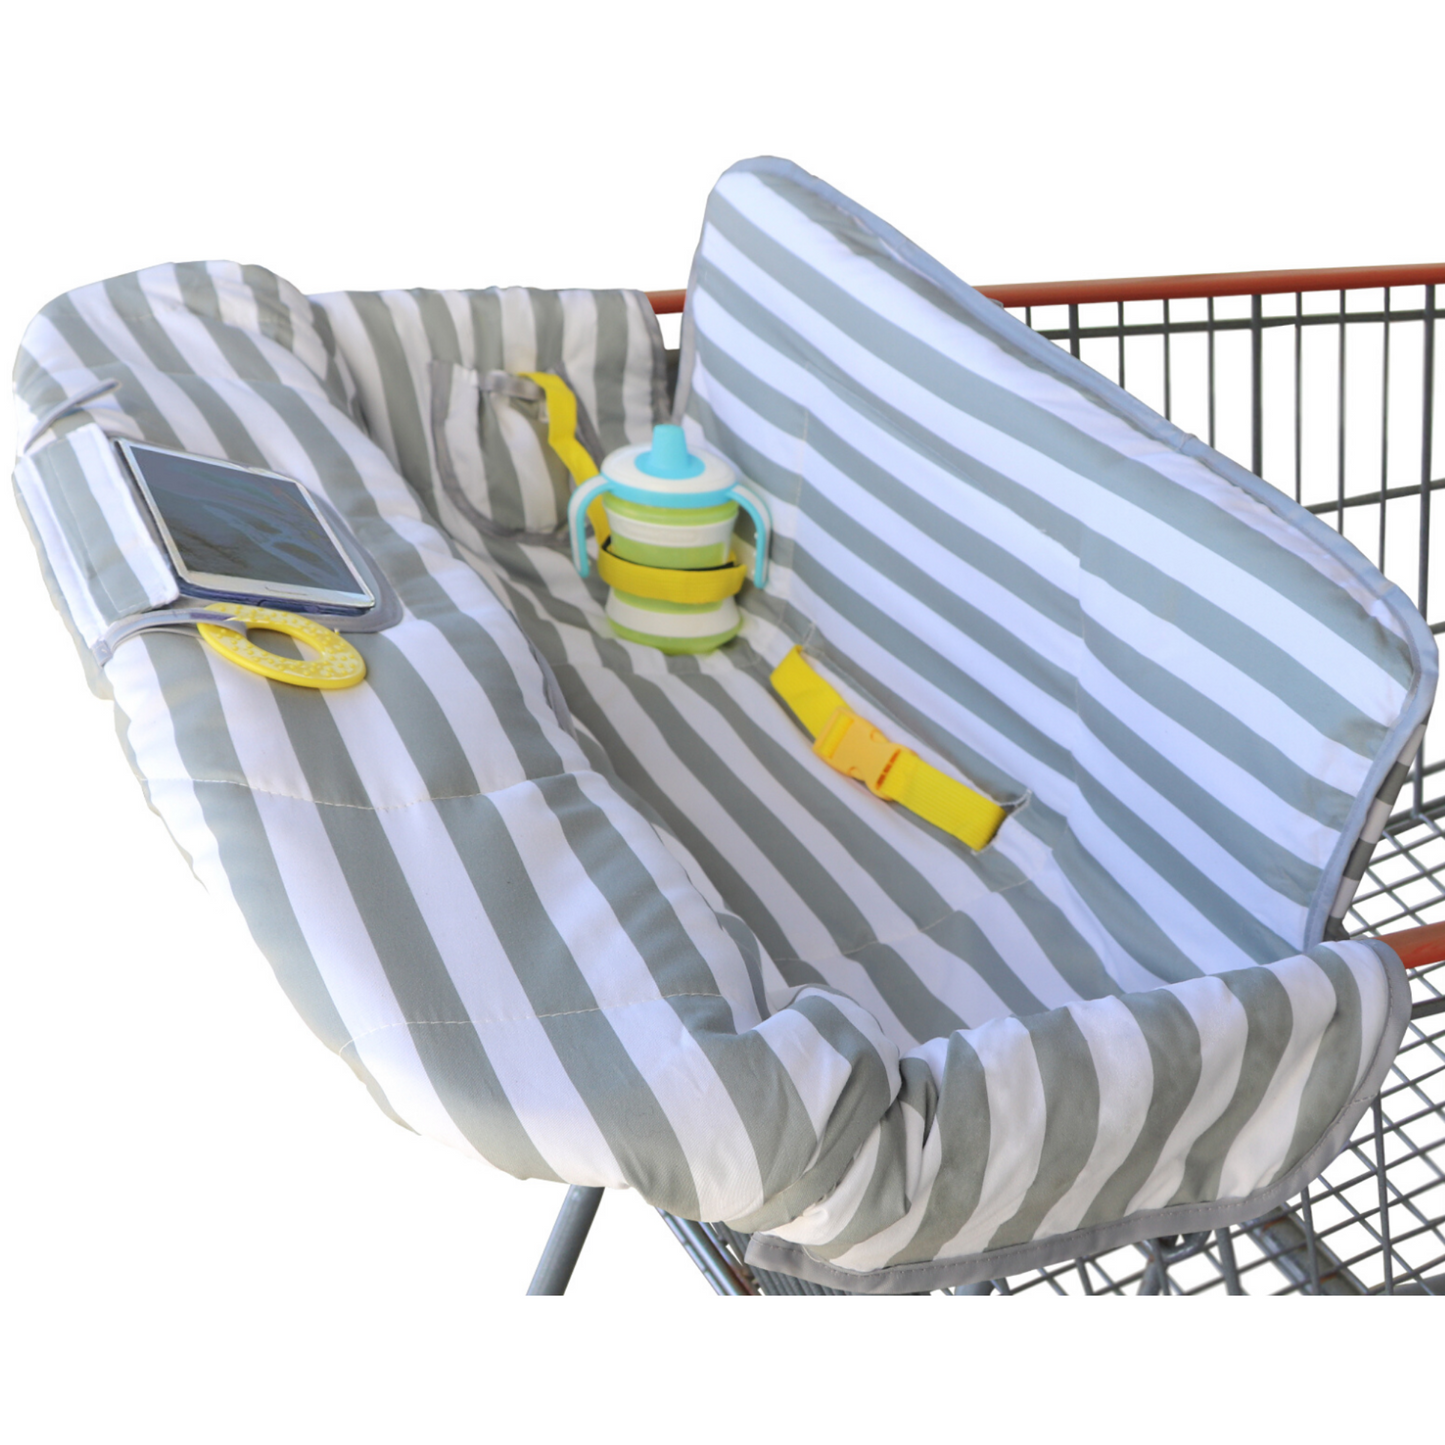 Shopping Cart & Highchair Cover - Gray and White Stripe